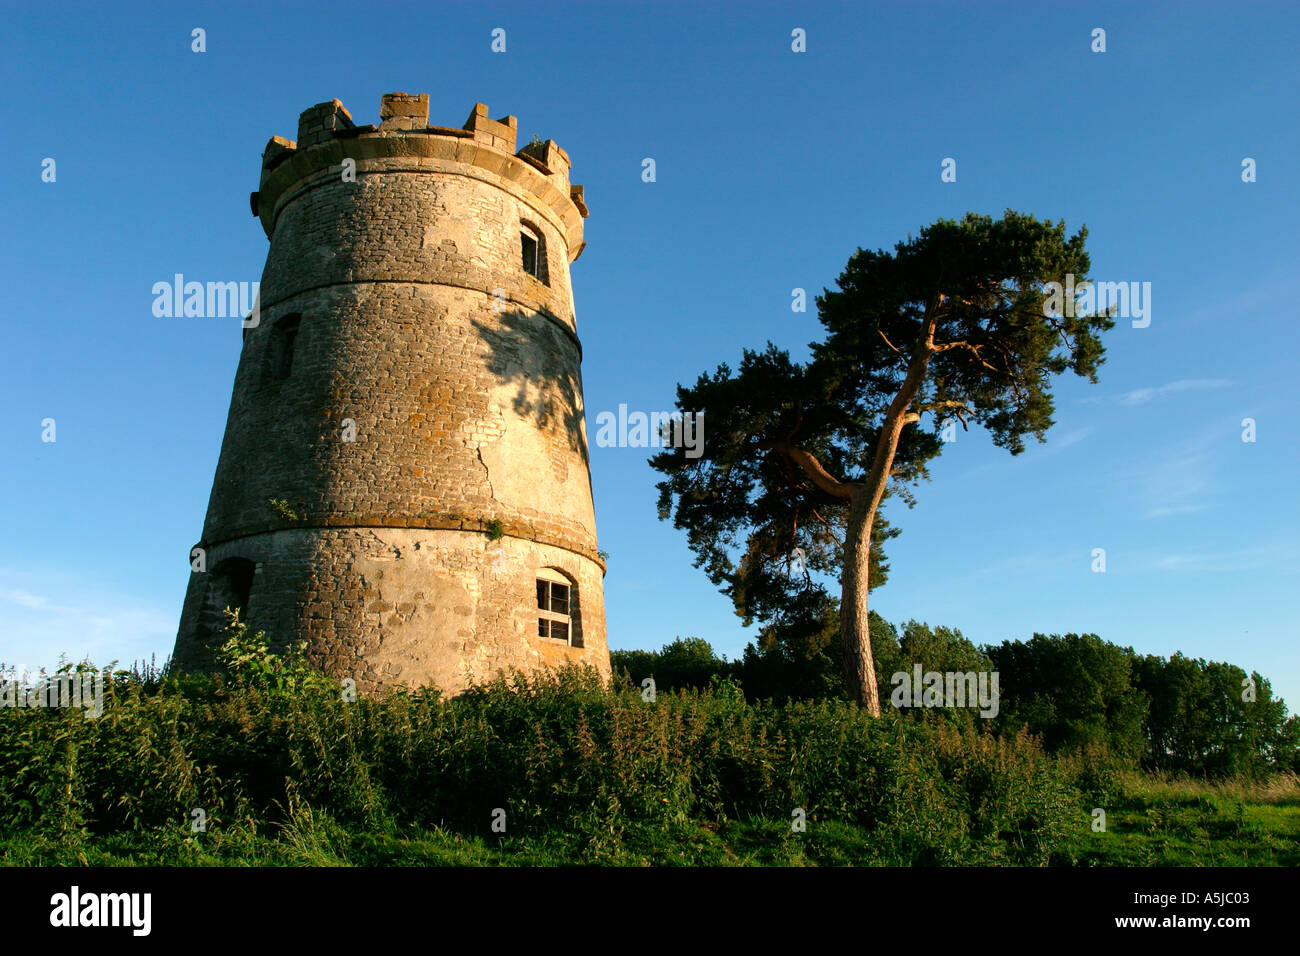 Derelict windmill with cedar tree and power lines Stock Photo